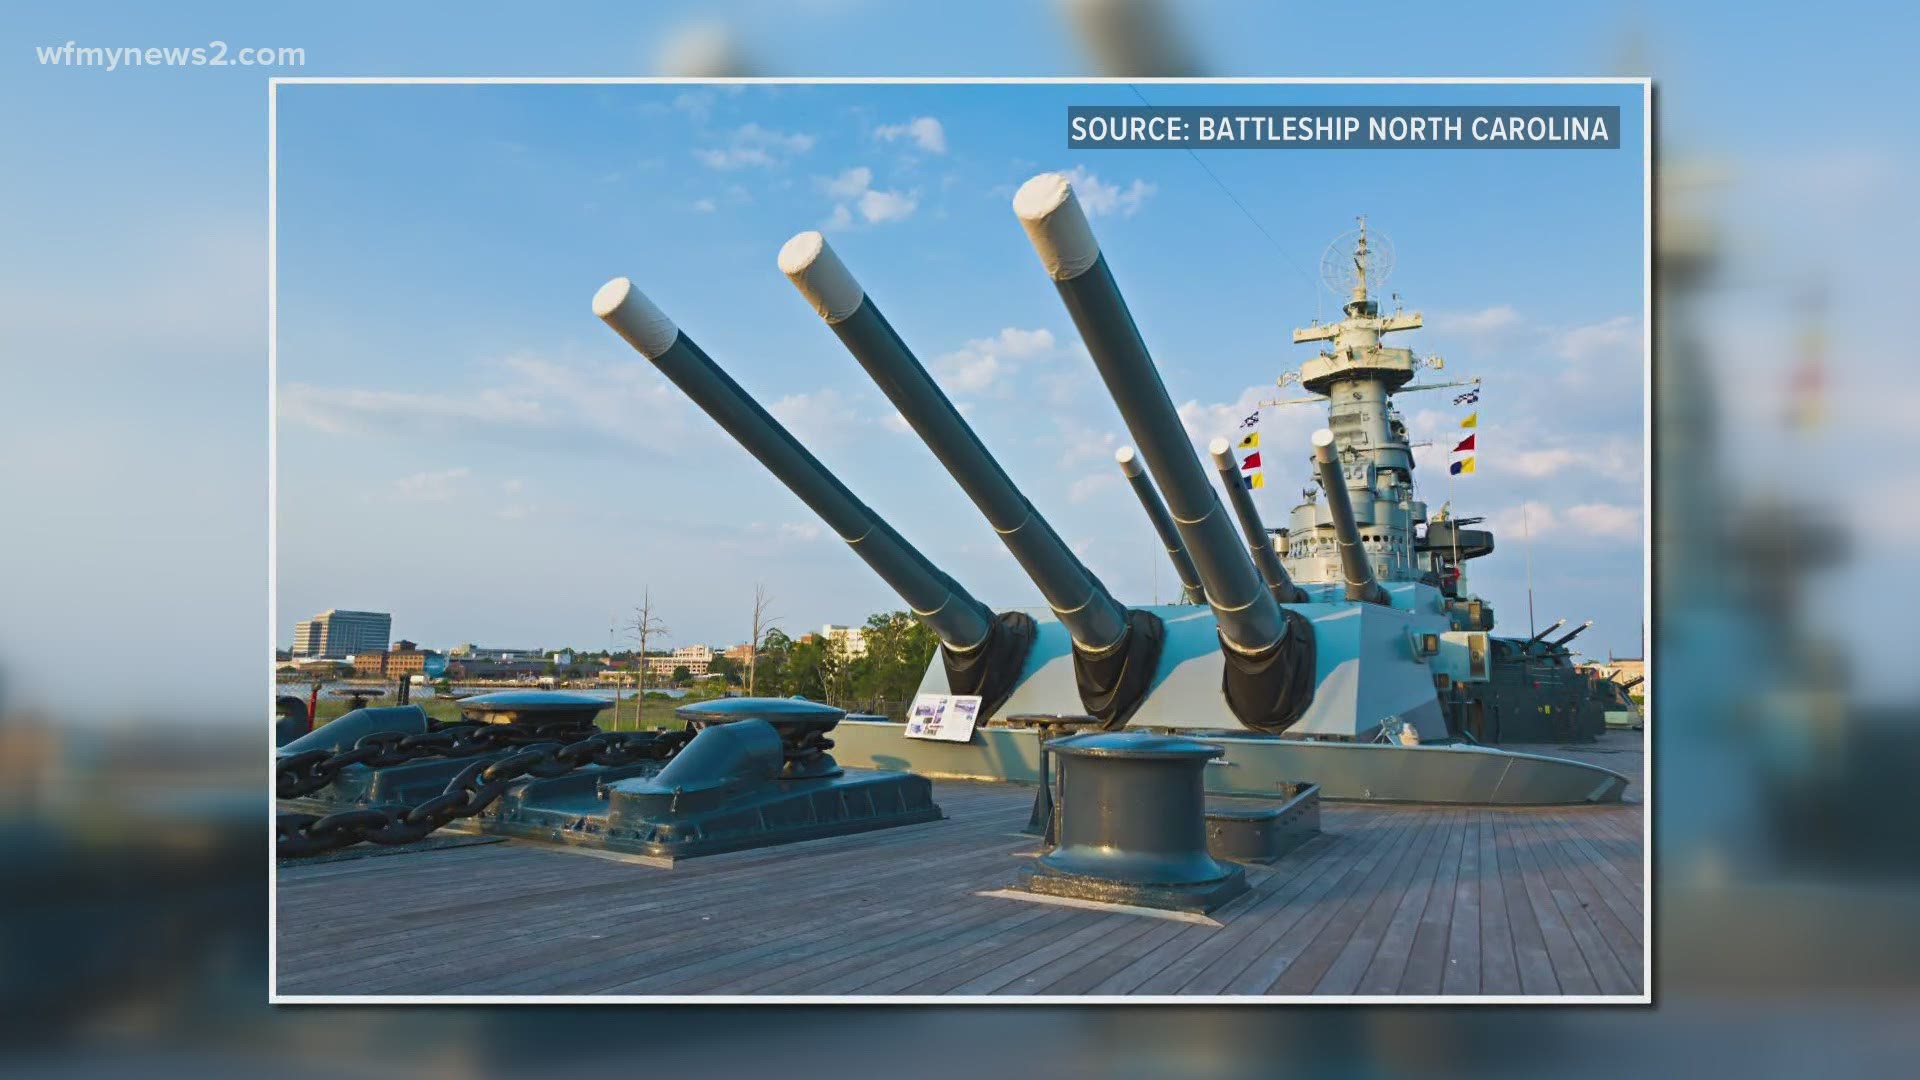 A podcast about The Battleship North Carolina is ready to roll.